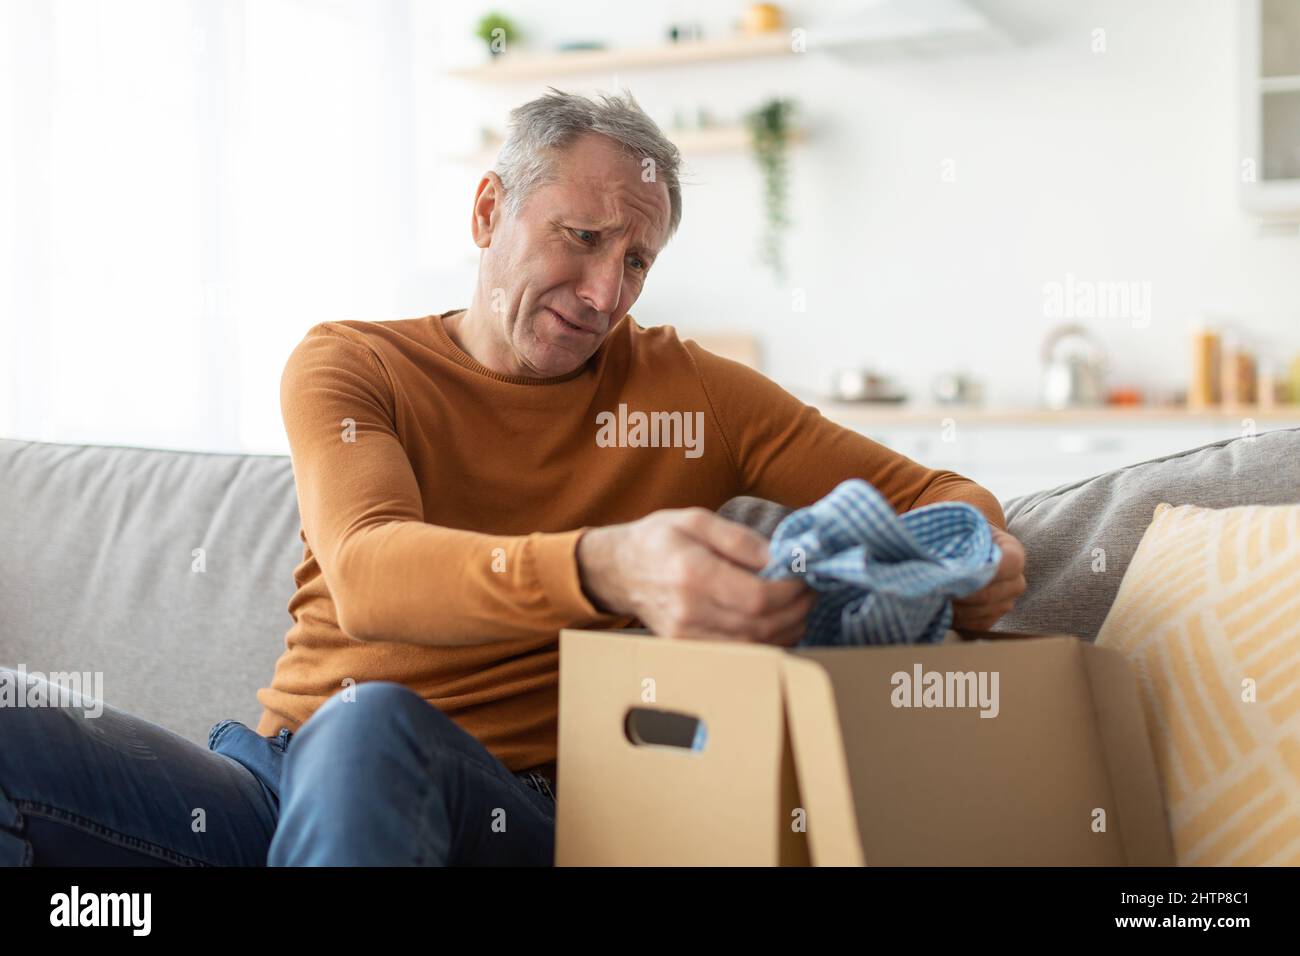 Sad mature man unpacking wrong parcel, delivery mistake concept Stock Photo